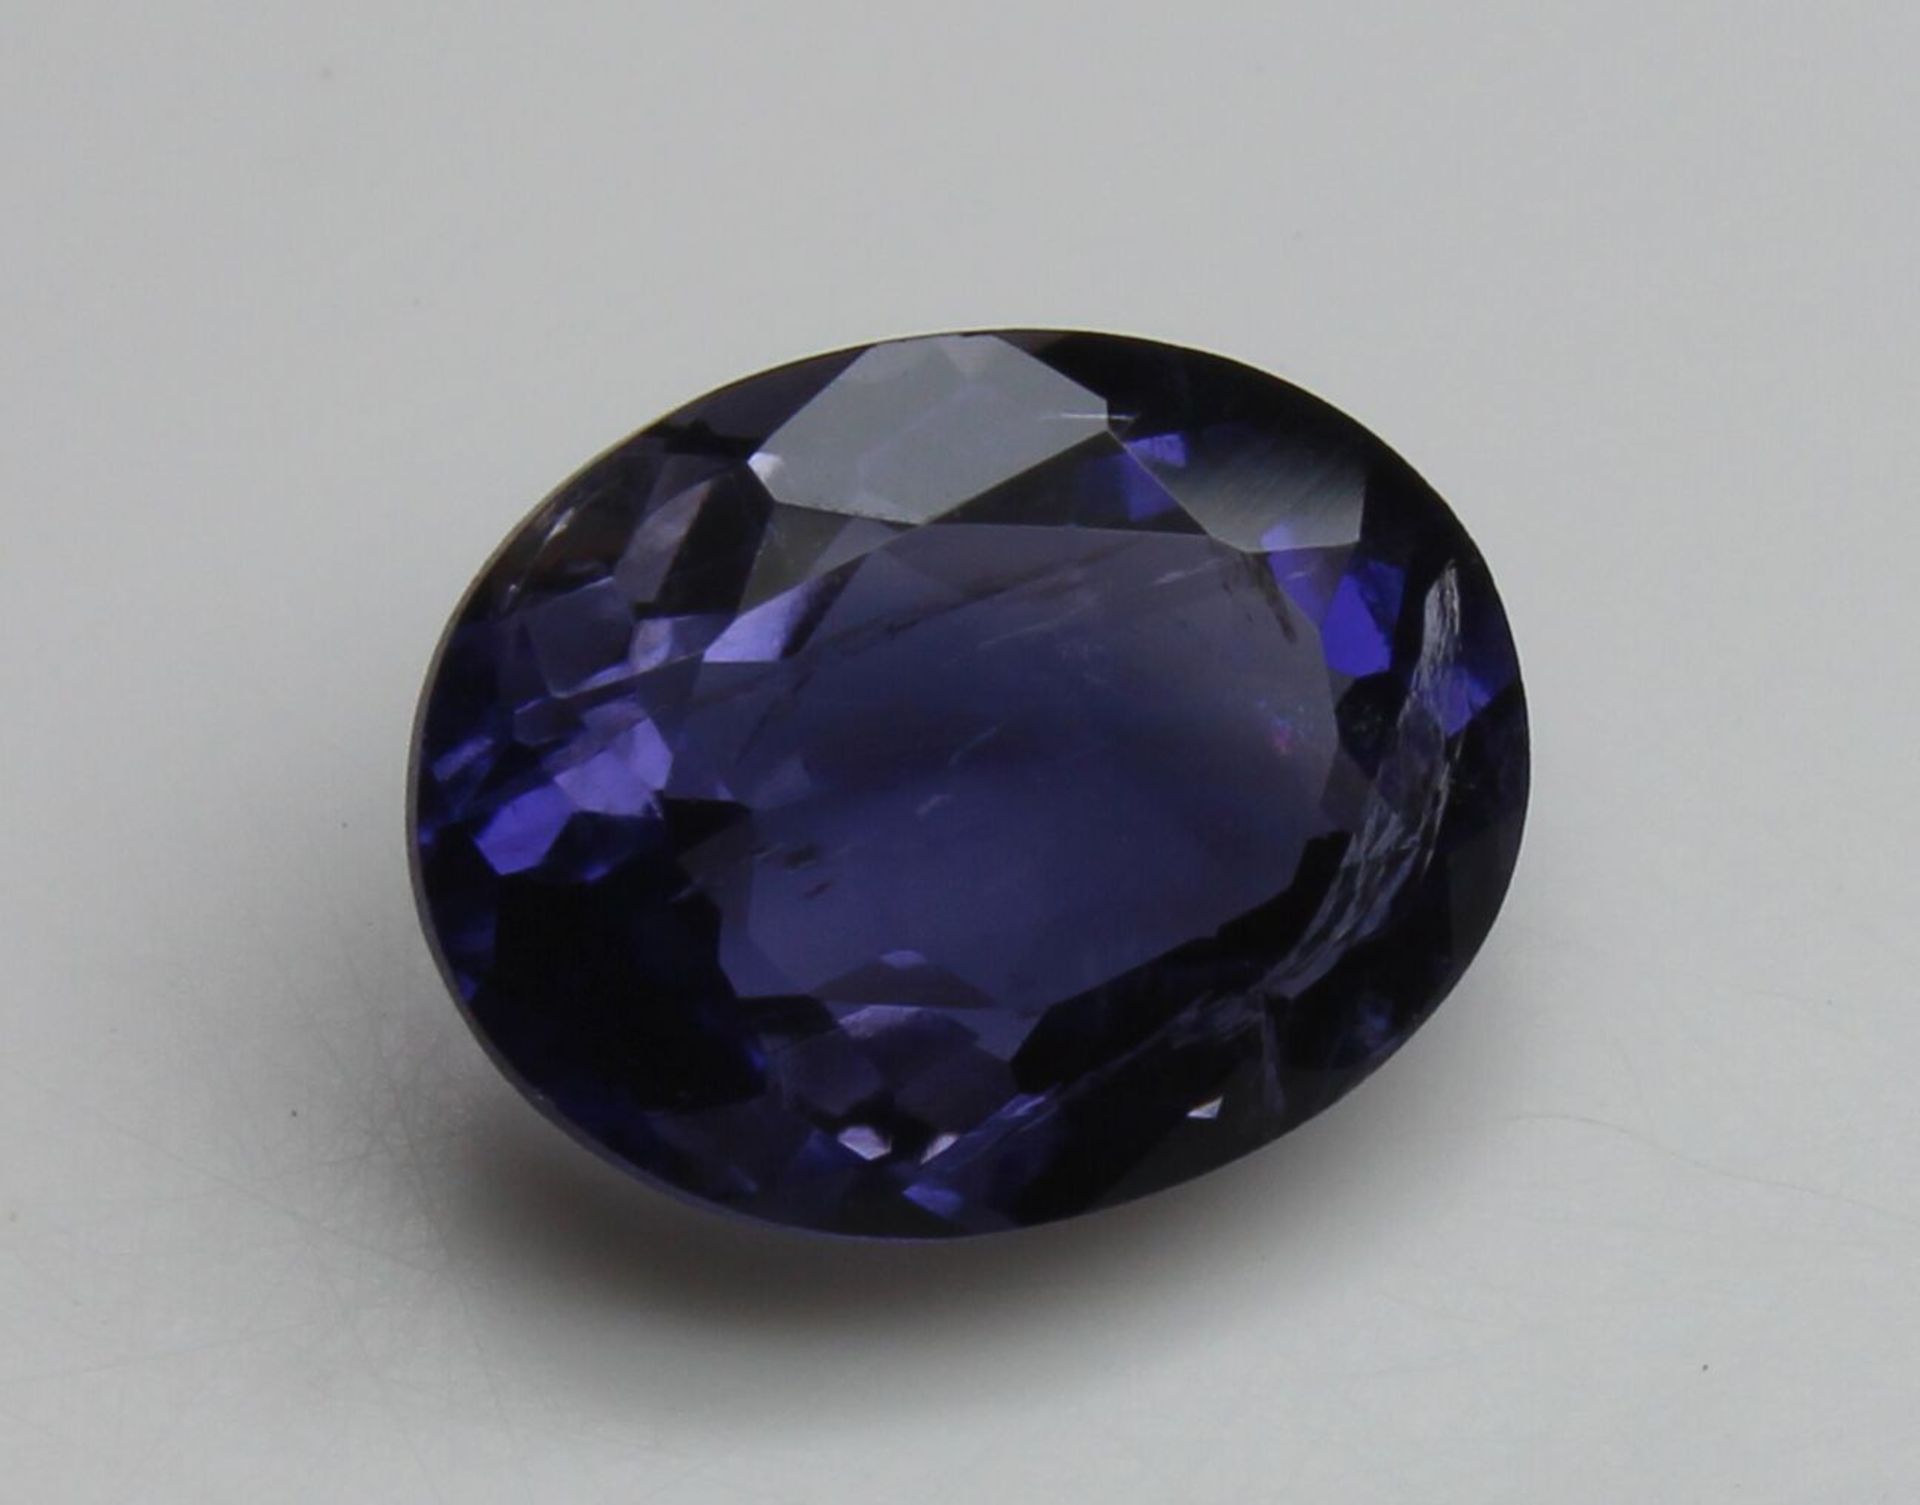 2.36 Ct Igi Certified Iolite - Without Reserve - Image 2 of 4